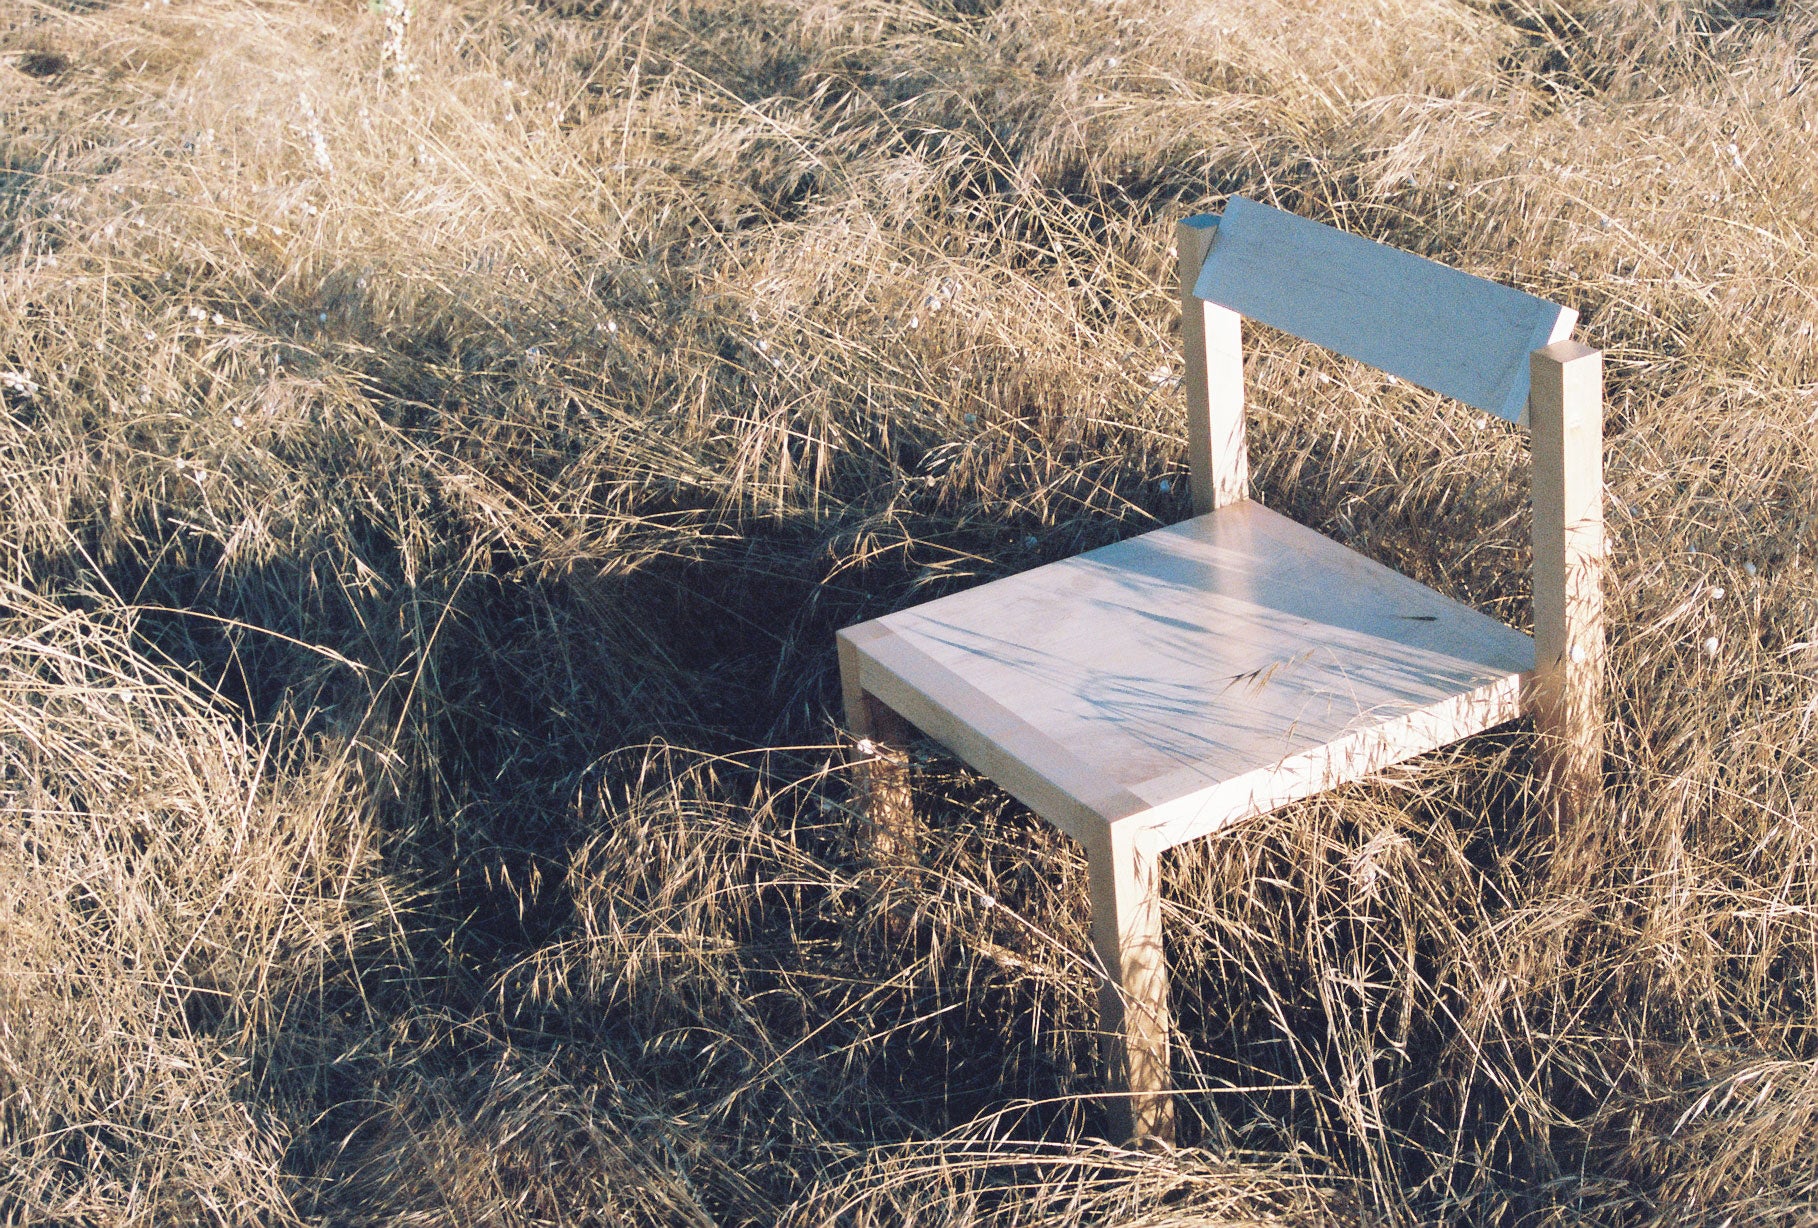 Anything Chair shot outside in dry grasslands